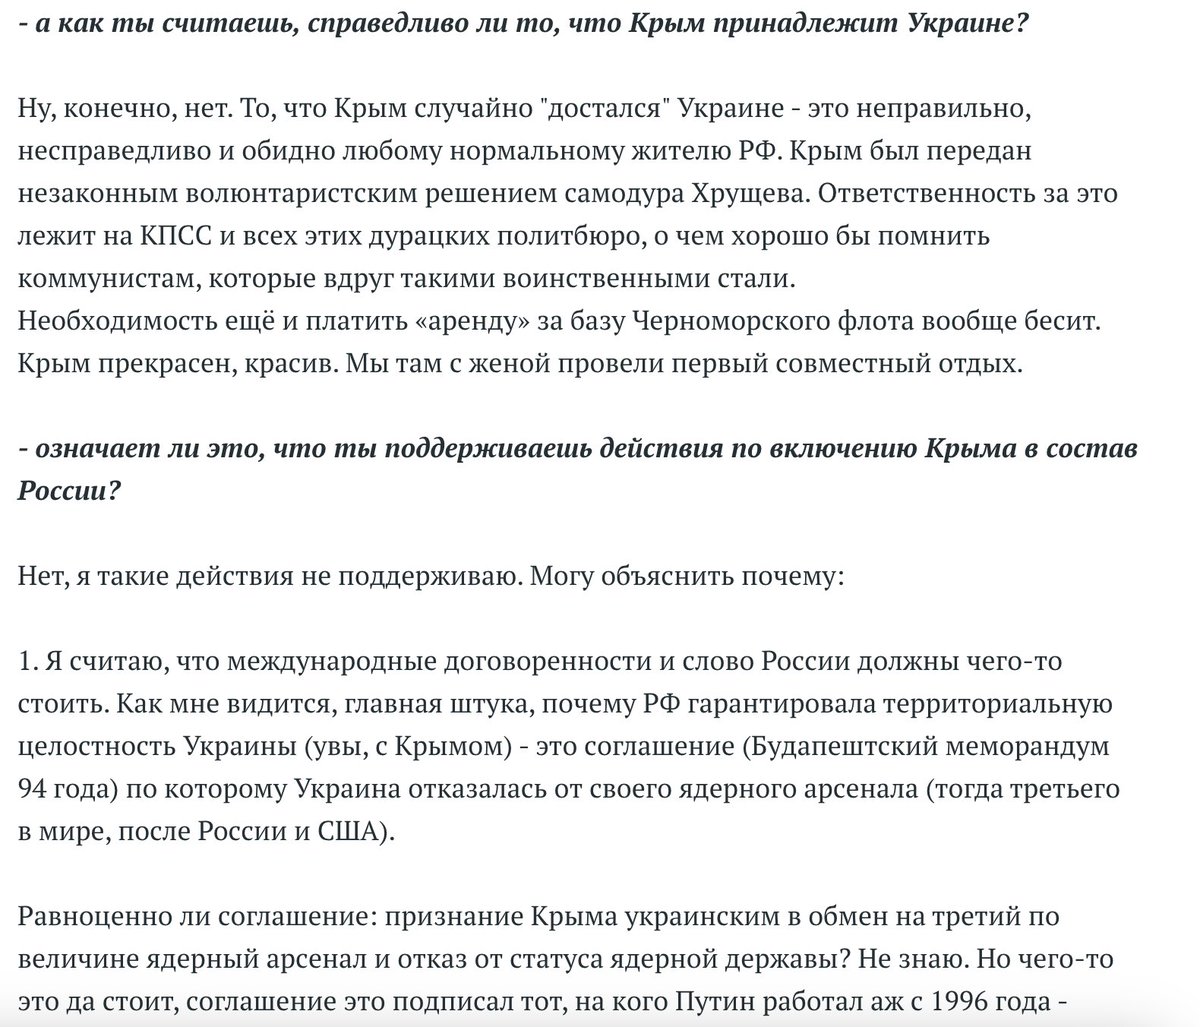 Wow! Navalny sounds like a real imperialist here! Is the quote fake? No, the quote is real. It's from his discussion of Crimea's sham 'referendum' in March 2014. However, it lacks context. Here's what Navalny actually continues to say. 3/